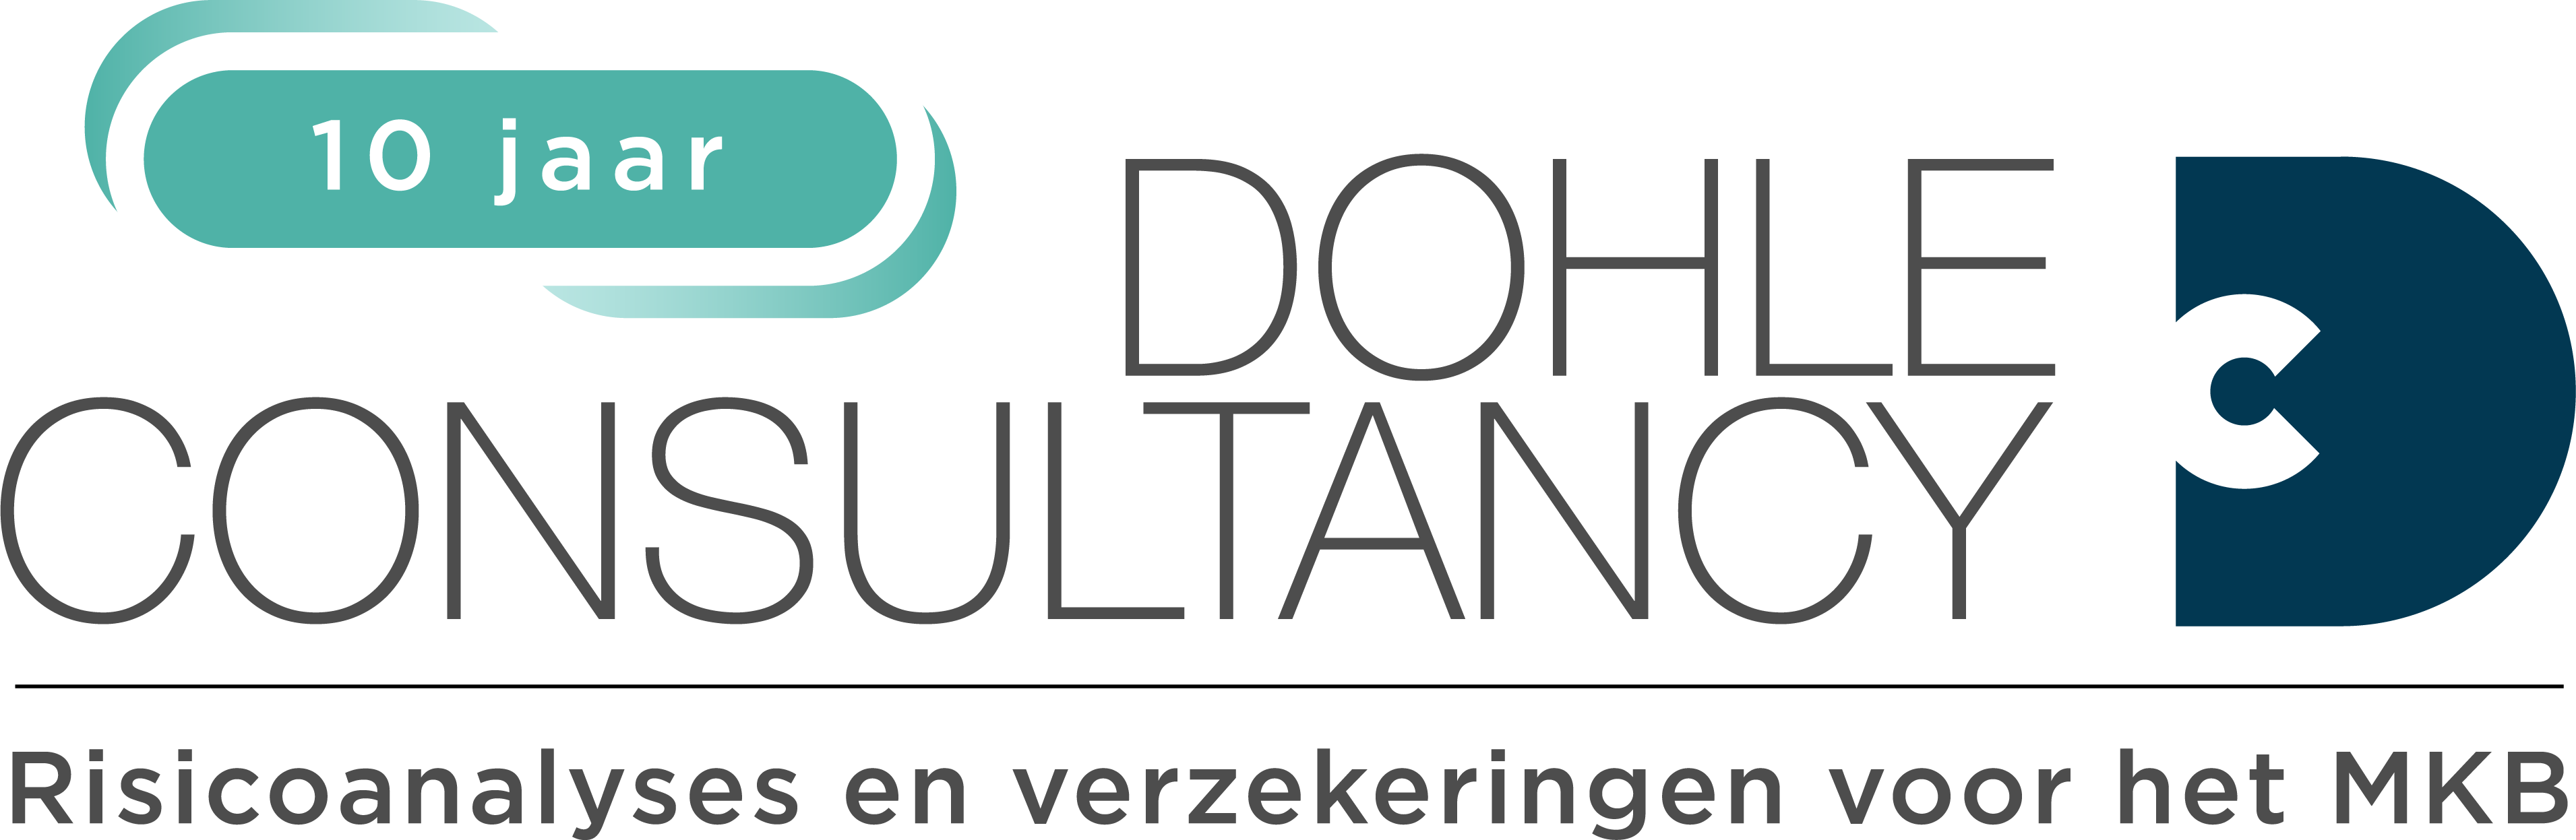 Dohle Consultancy